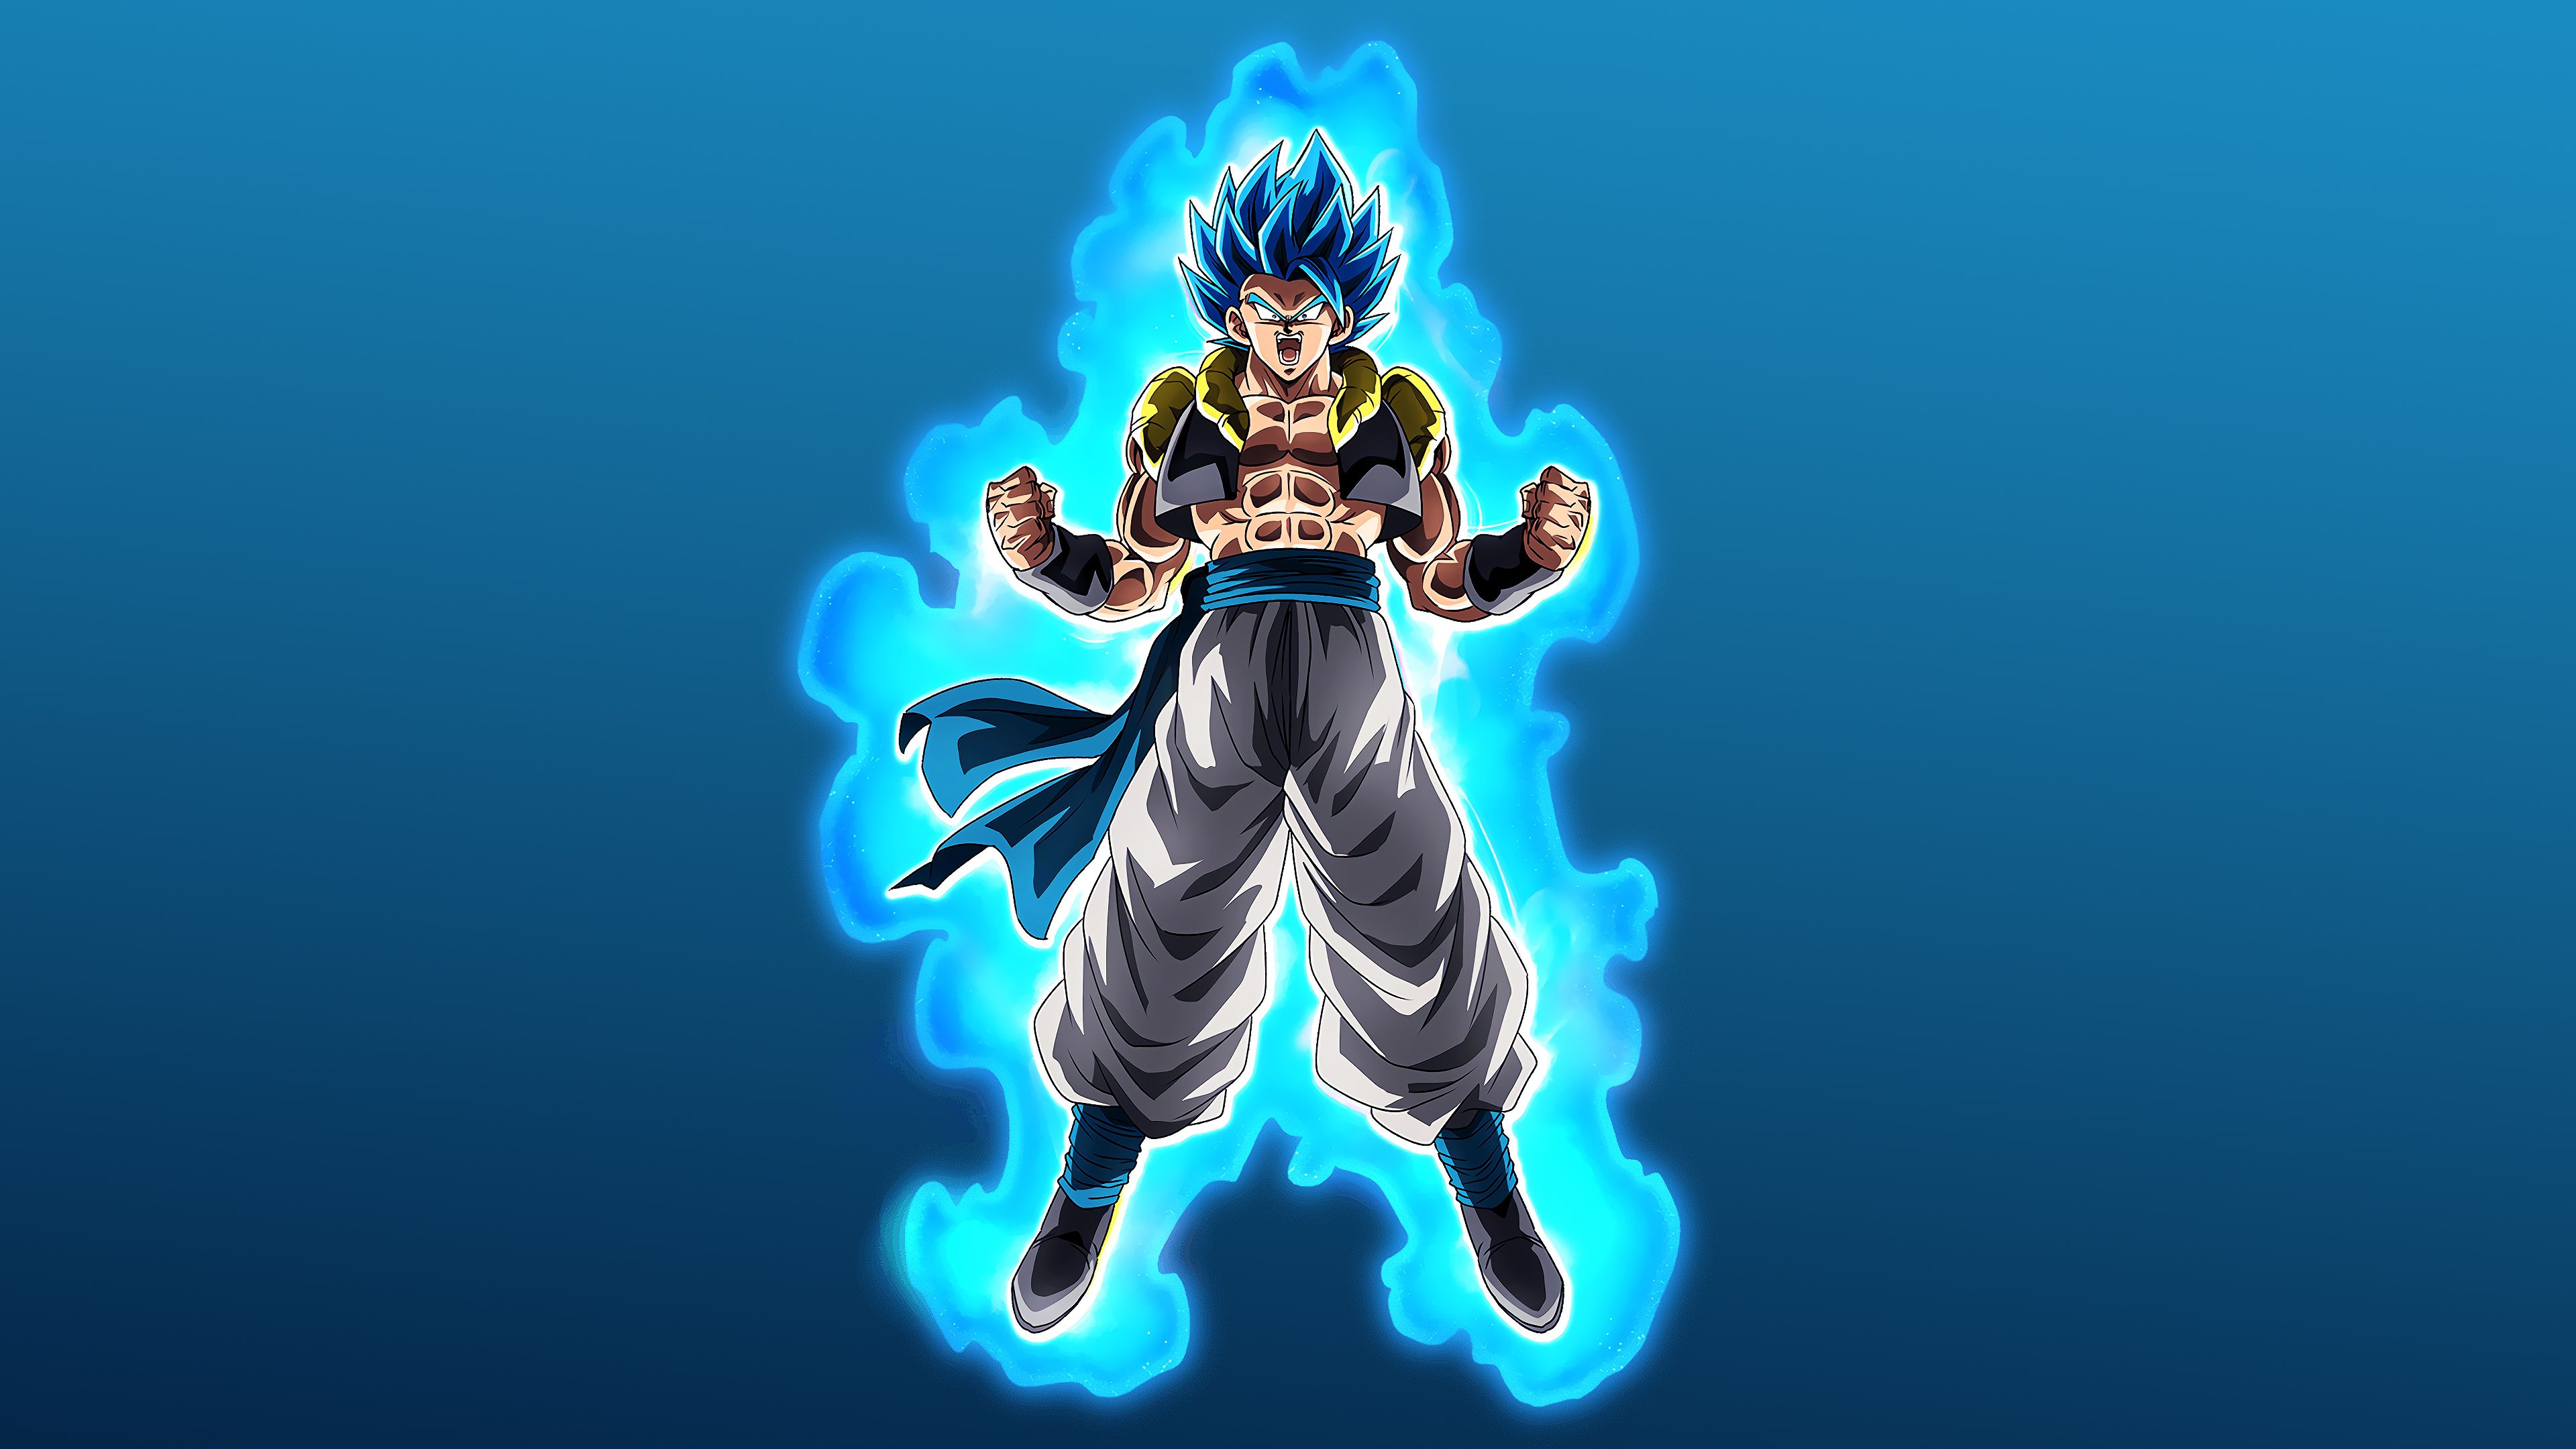 35 Gogeta Wallpapers for iPhone and Android by James Gill